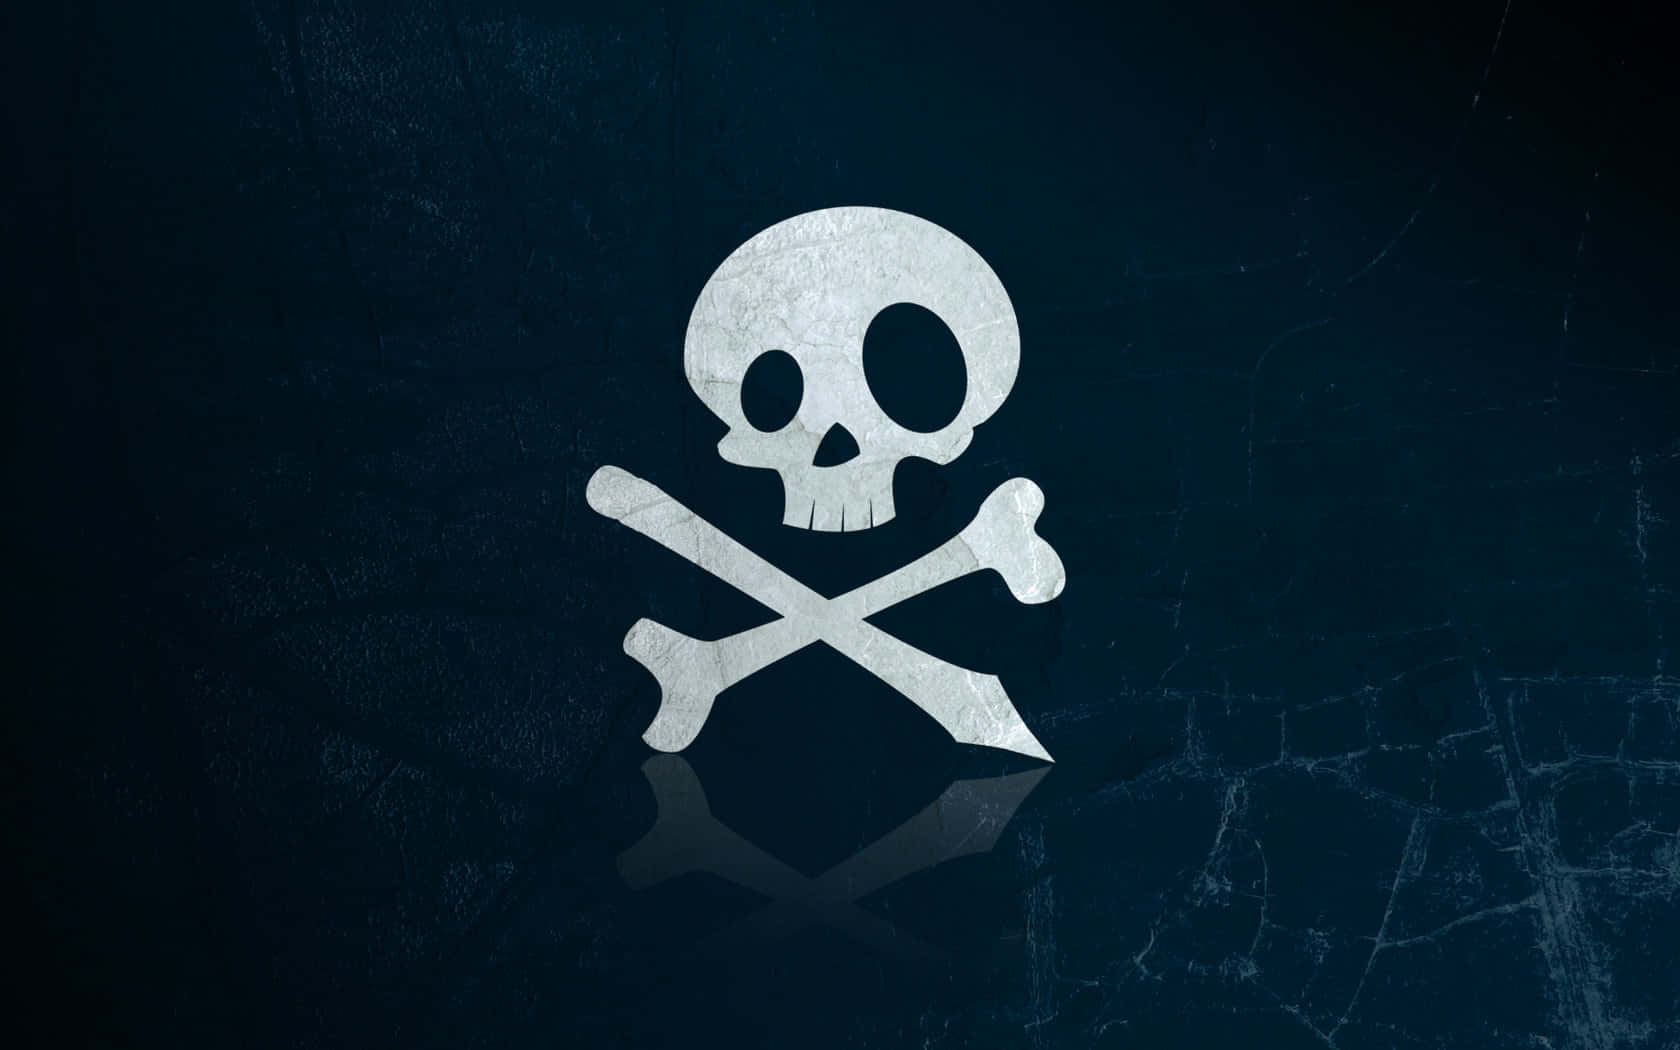 A White Skull And Crossbones Logo On A Dark Background